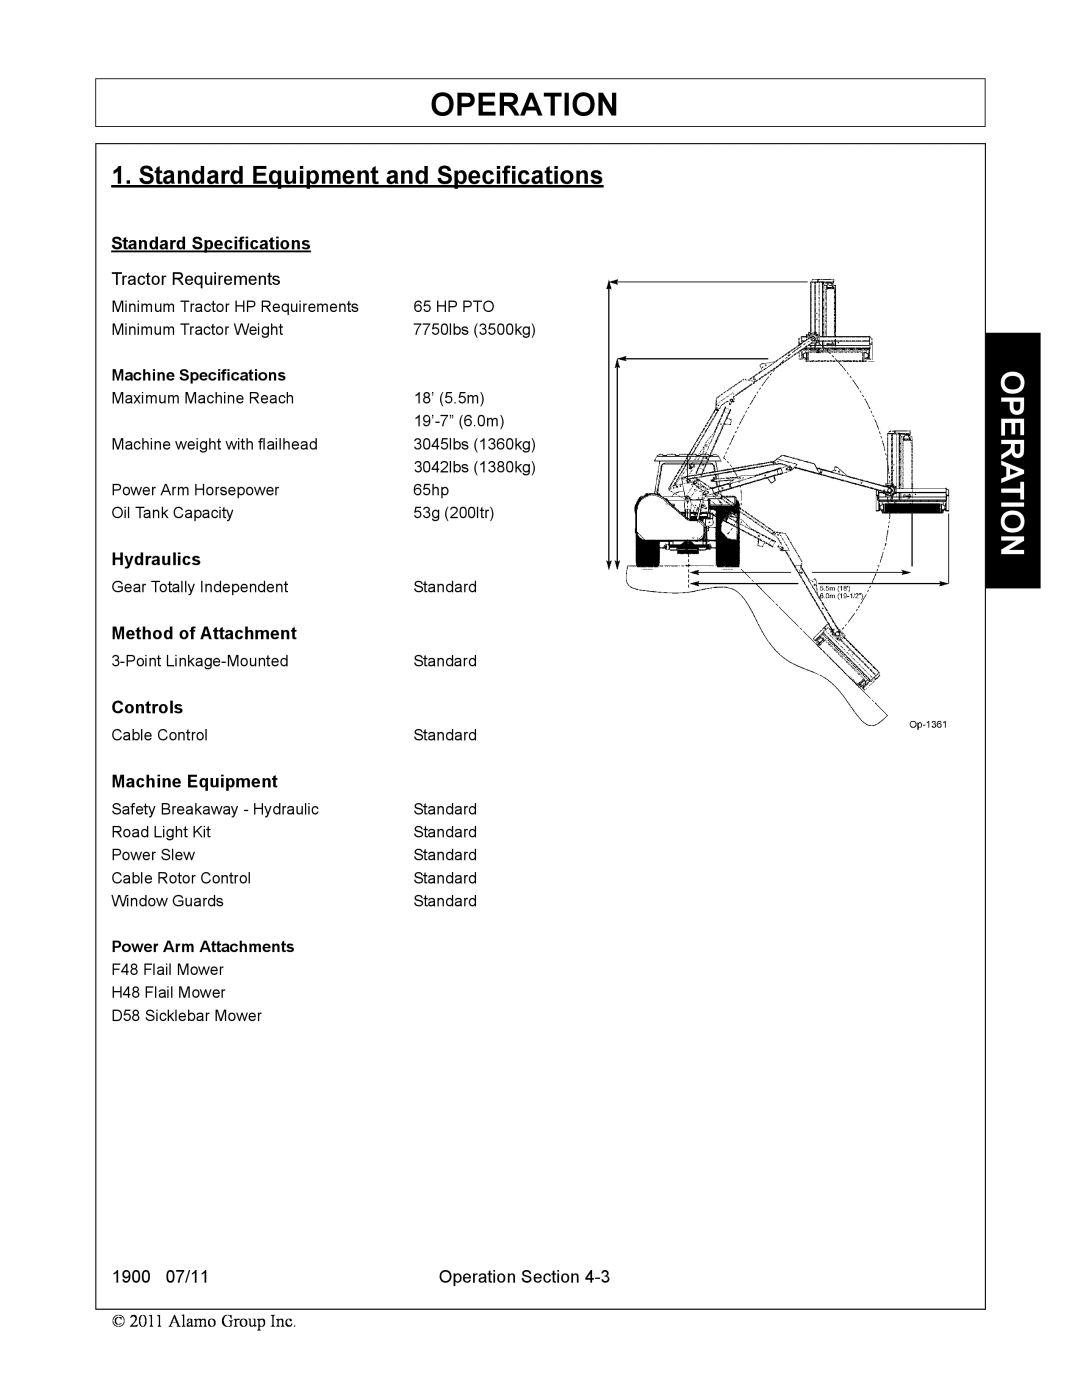 Alamo 1900 Standard Equipment and Specifications, Operation, Standard Specifications, Hydraulics, Method of Attachment 